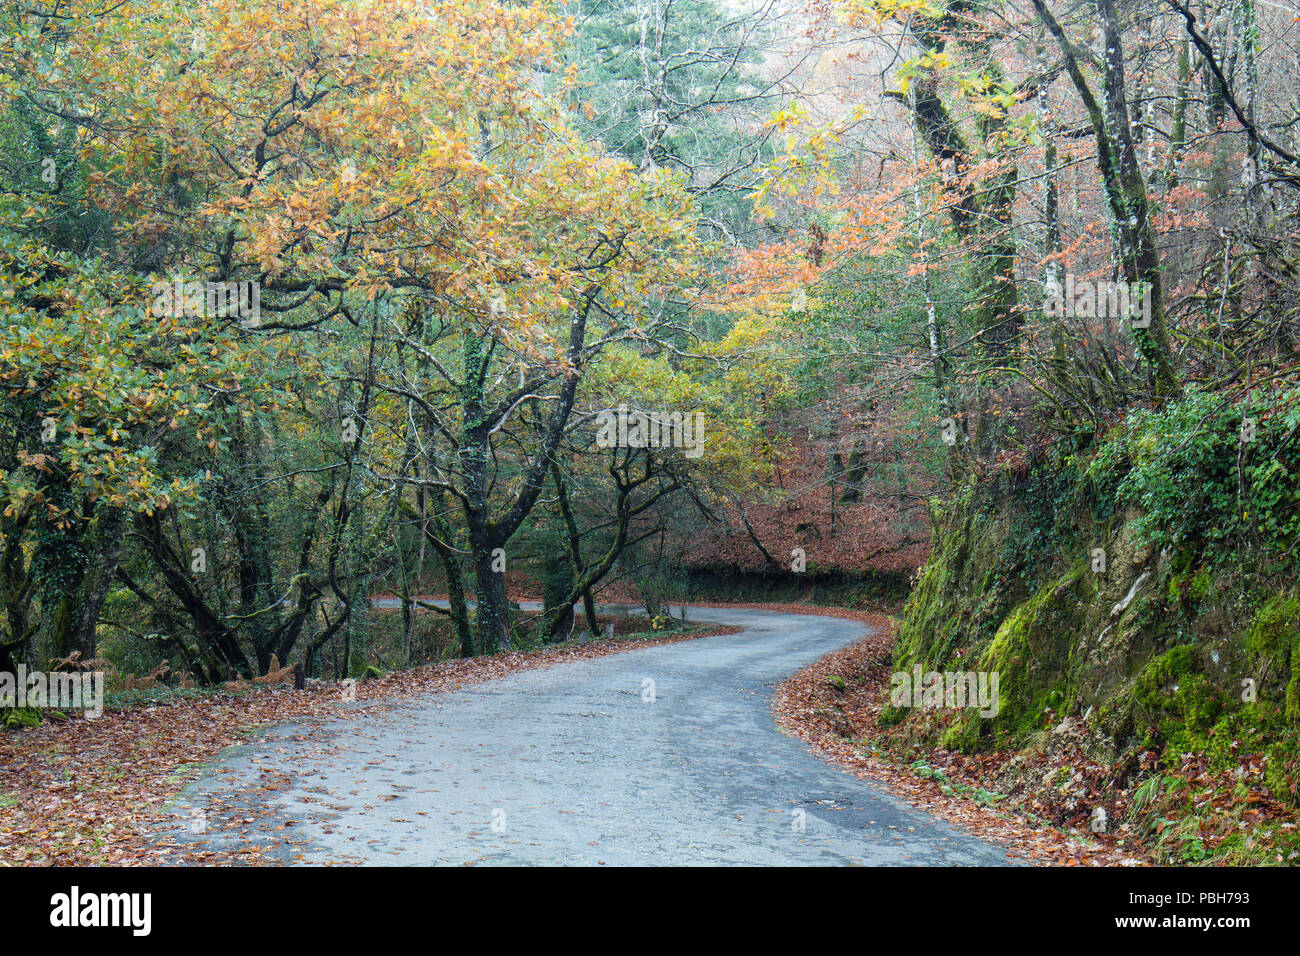 Autumn road through the trees in the Mata da Albergaria national forest. Peneda-Geres National Park. Stock Photo